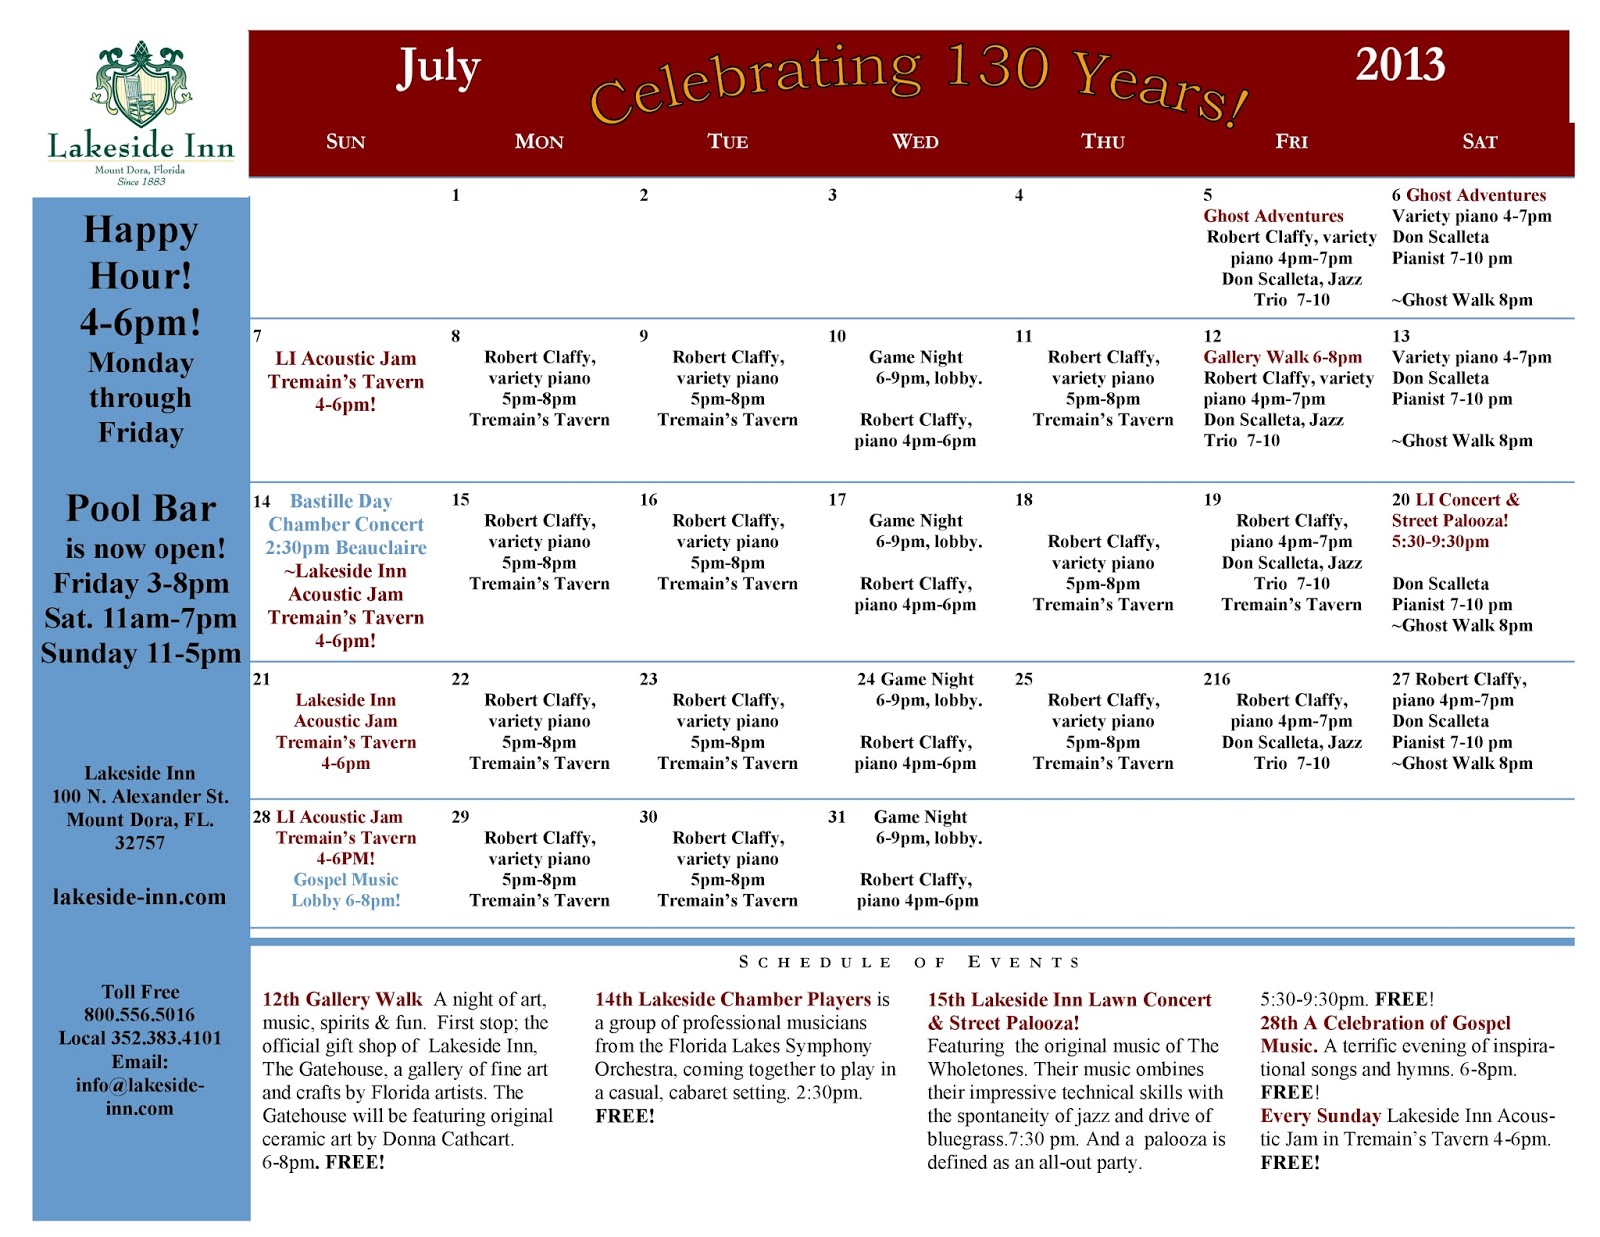 What To Do In Mount Dora Lakeside Inn Event Calendar for the Month of July